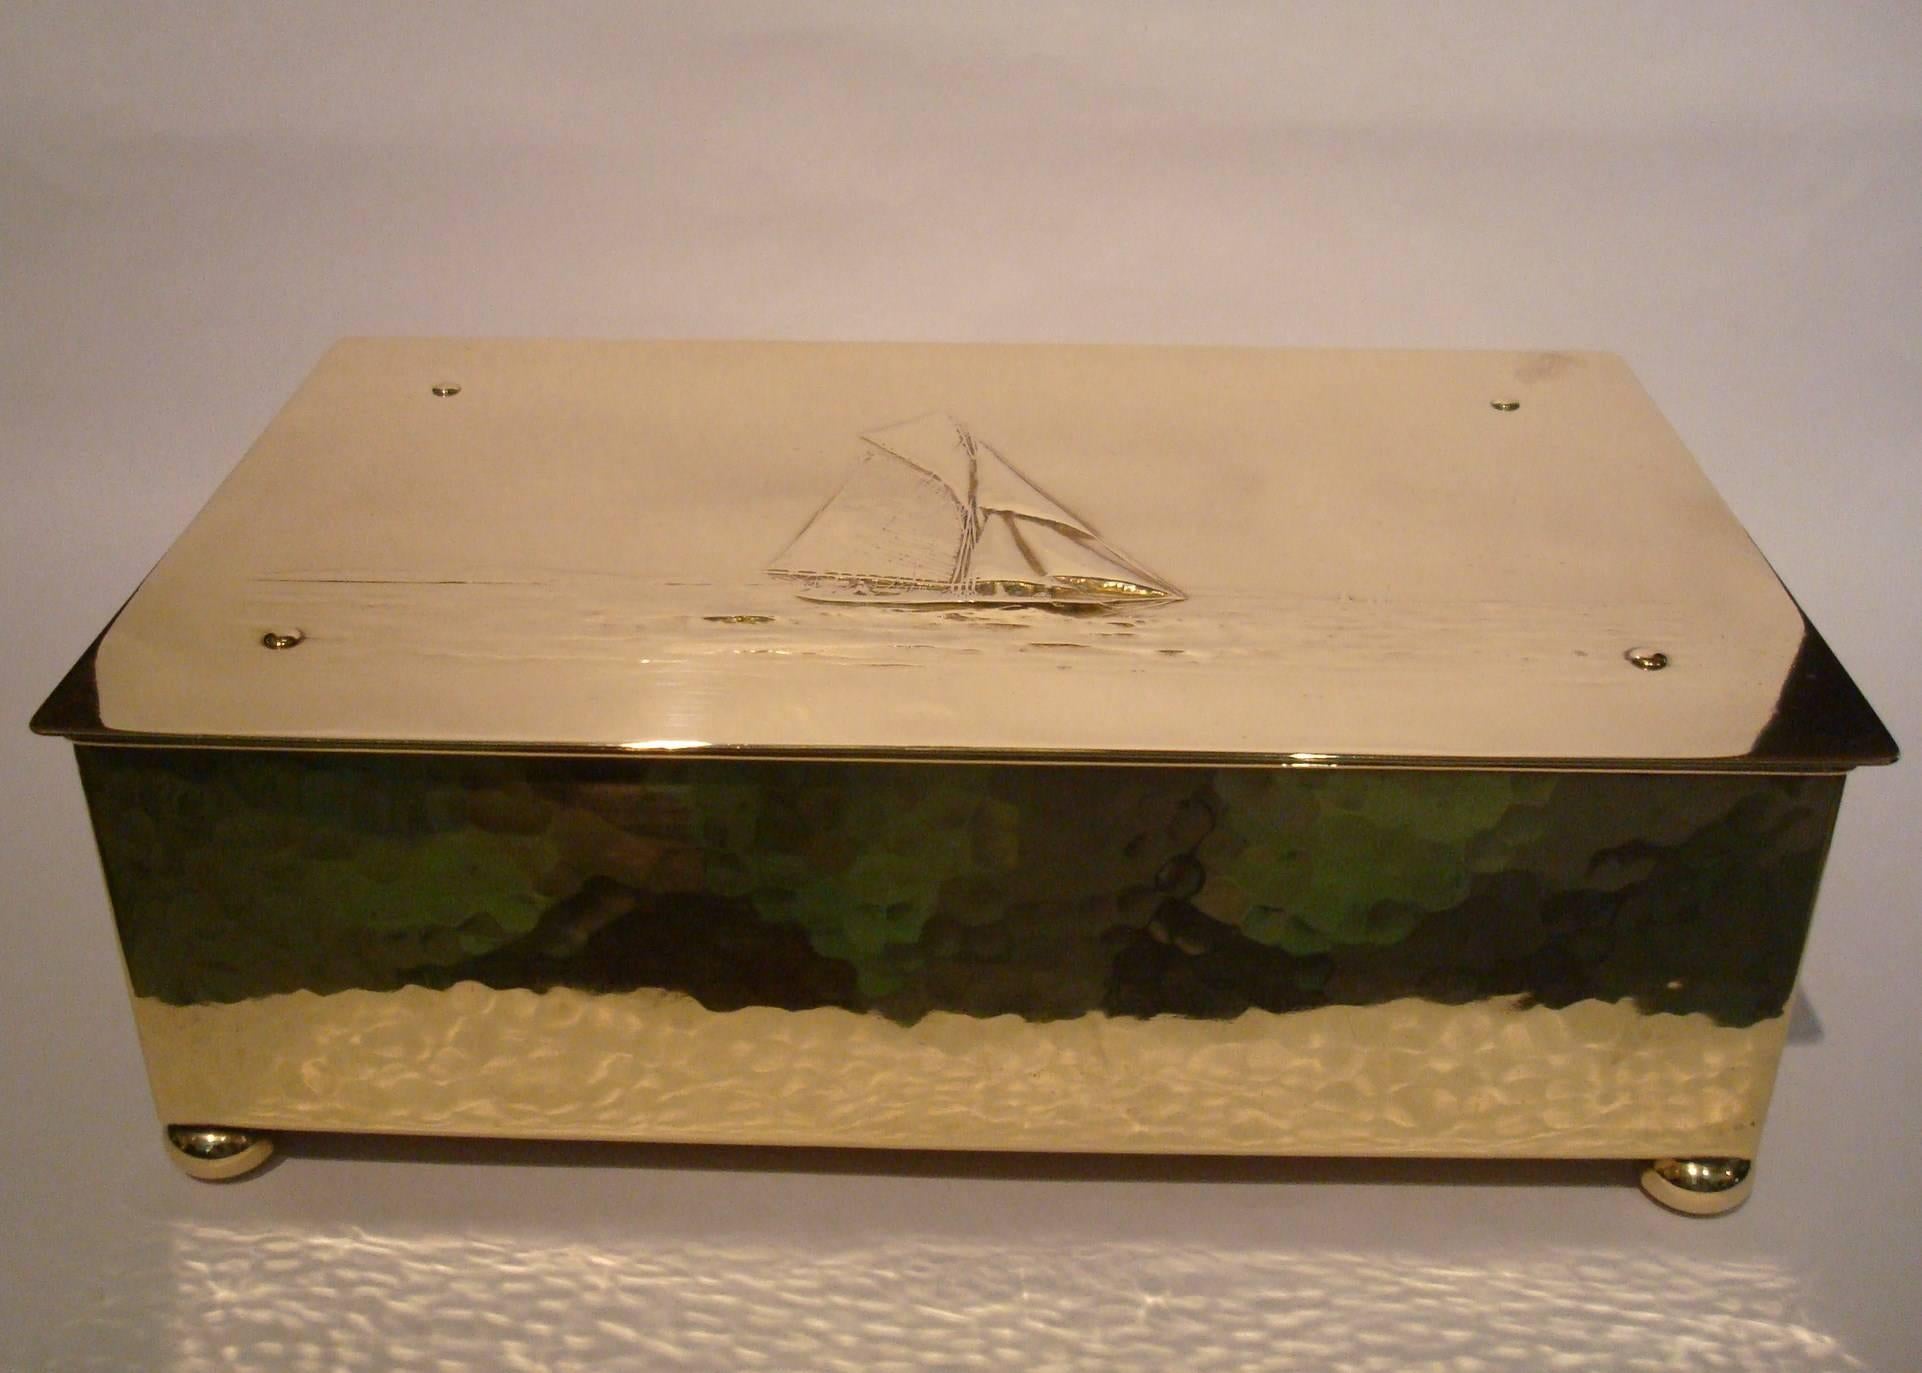 Very neat old brass cigar box (humidor) with Hacifa cigar advertising. Manufactured piece that once contained Hacifa cigars, hand-hammered brass case. Nice embossed image of a sailing Ship on top of box. Utilization of old vintage cigar box on